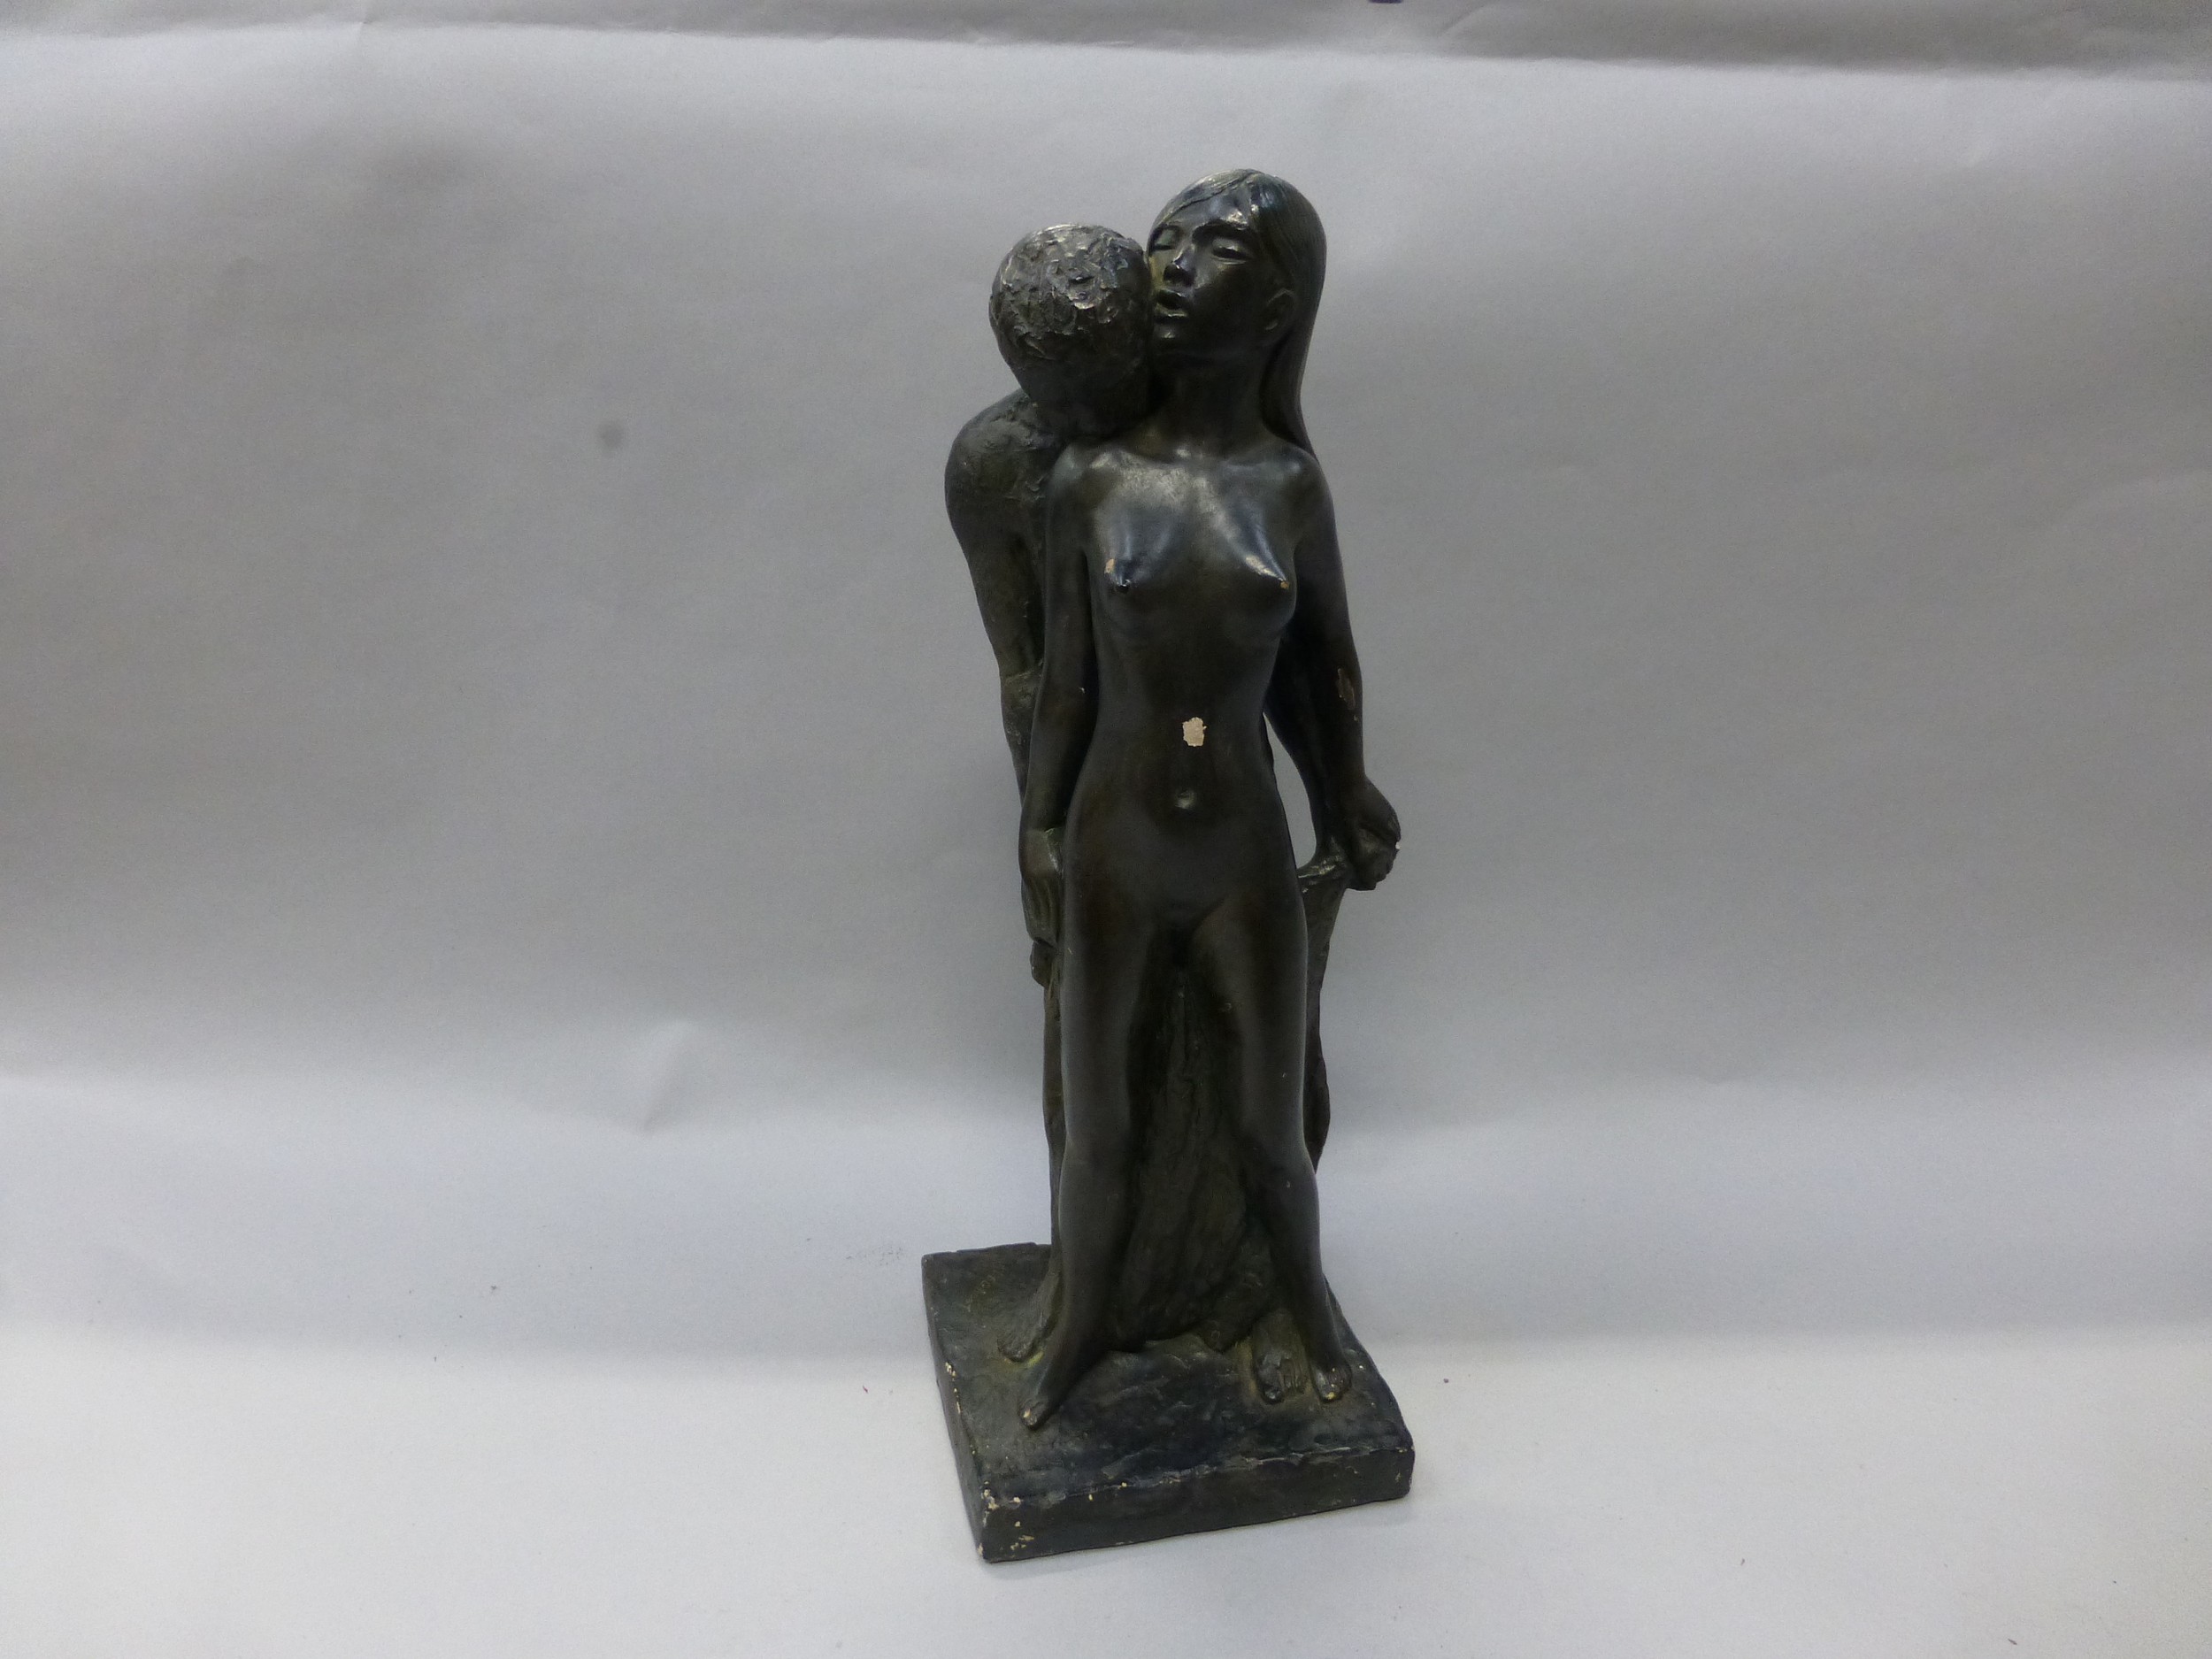 1967 Austin Prod Signed Theodore DeGroot nude lovers statue figure approx 21" tall. Some general age